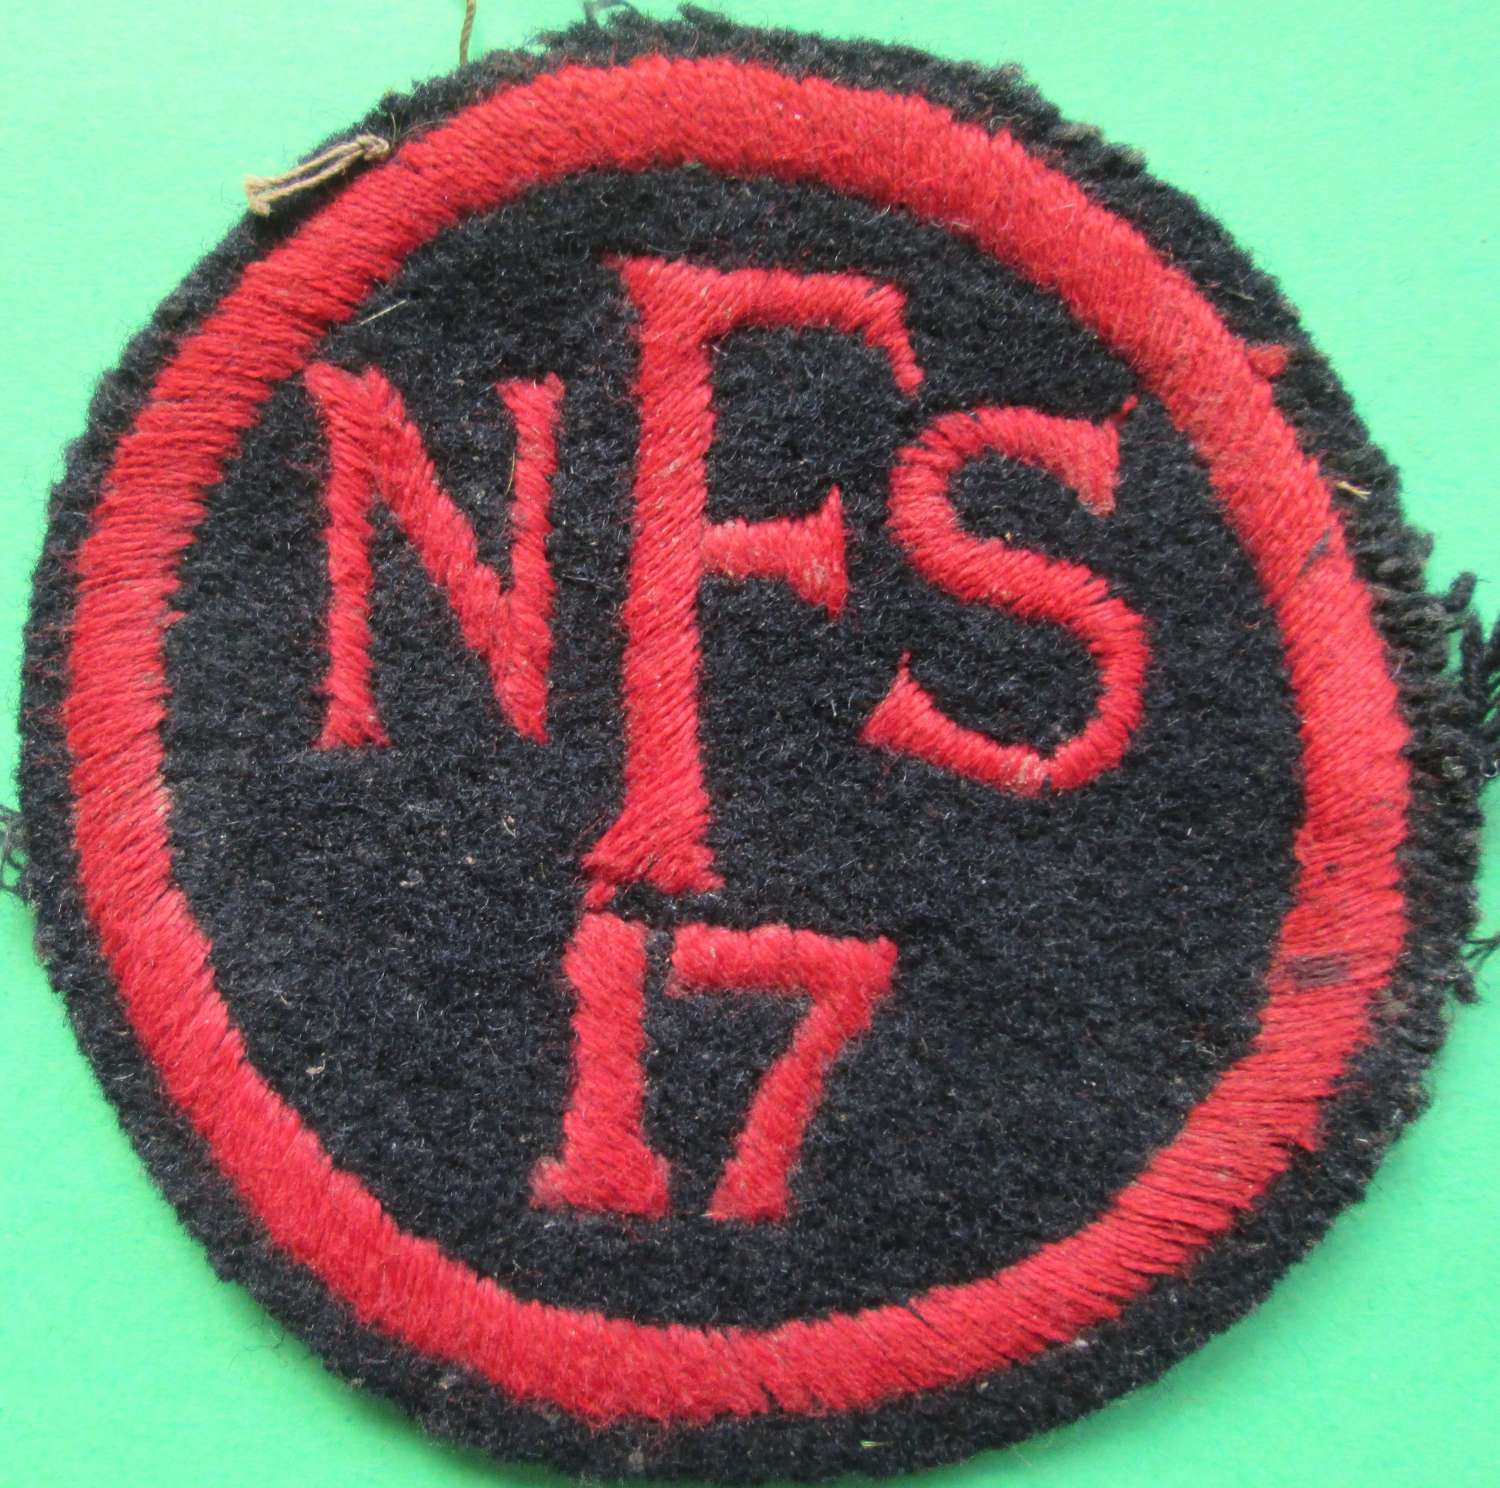 A NATIONAL FIRE SERVICE BADGE FOR AREA 17